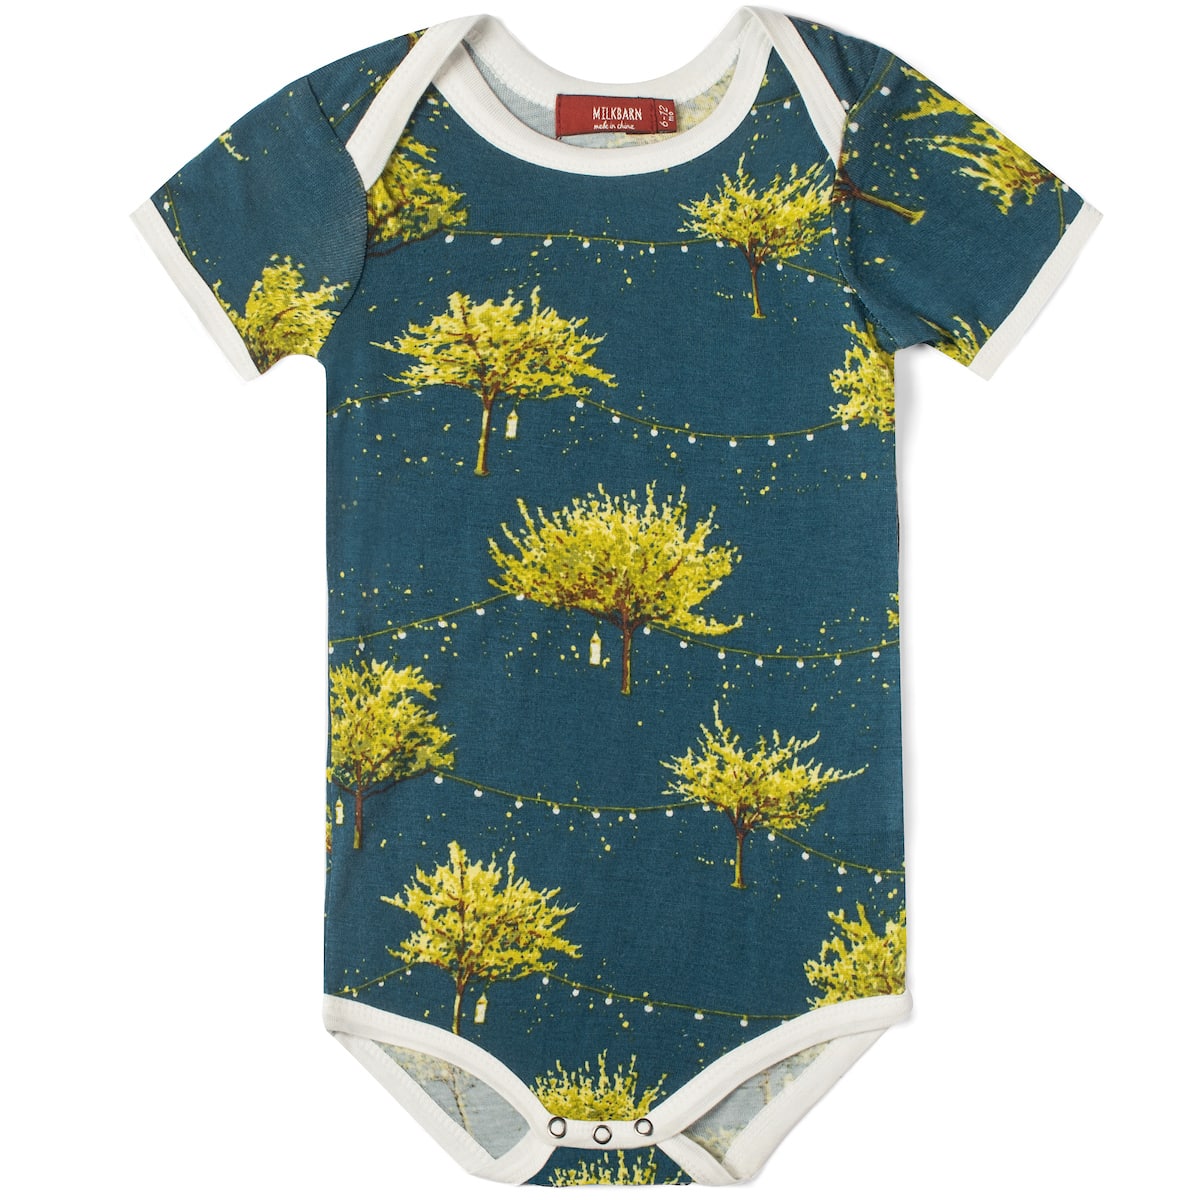 firefly bamboo one piece is dark blue with gold trees and fireflies all over displayed on a white background